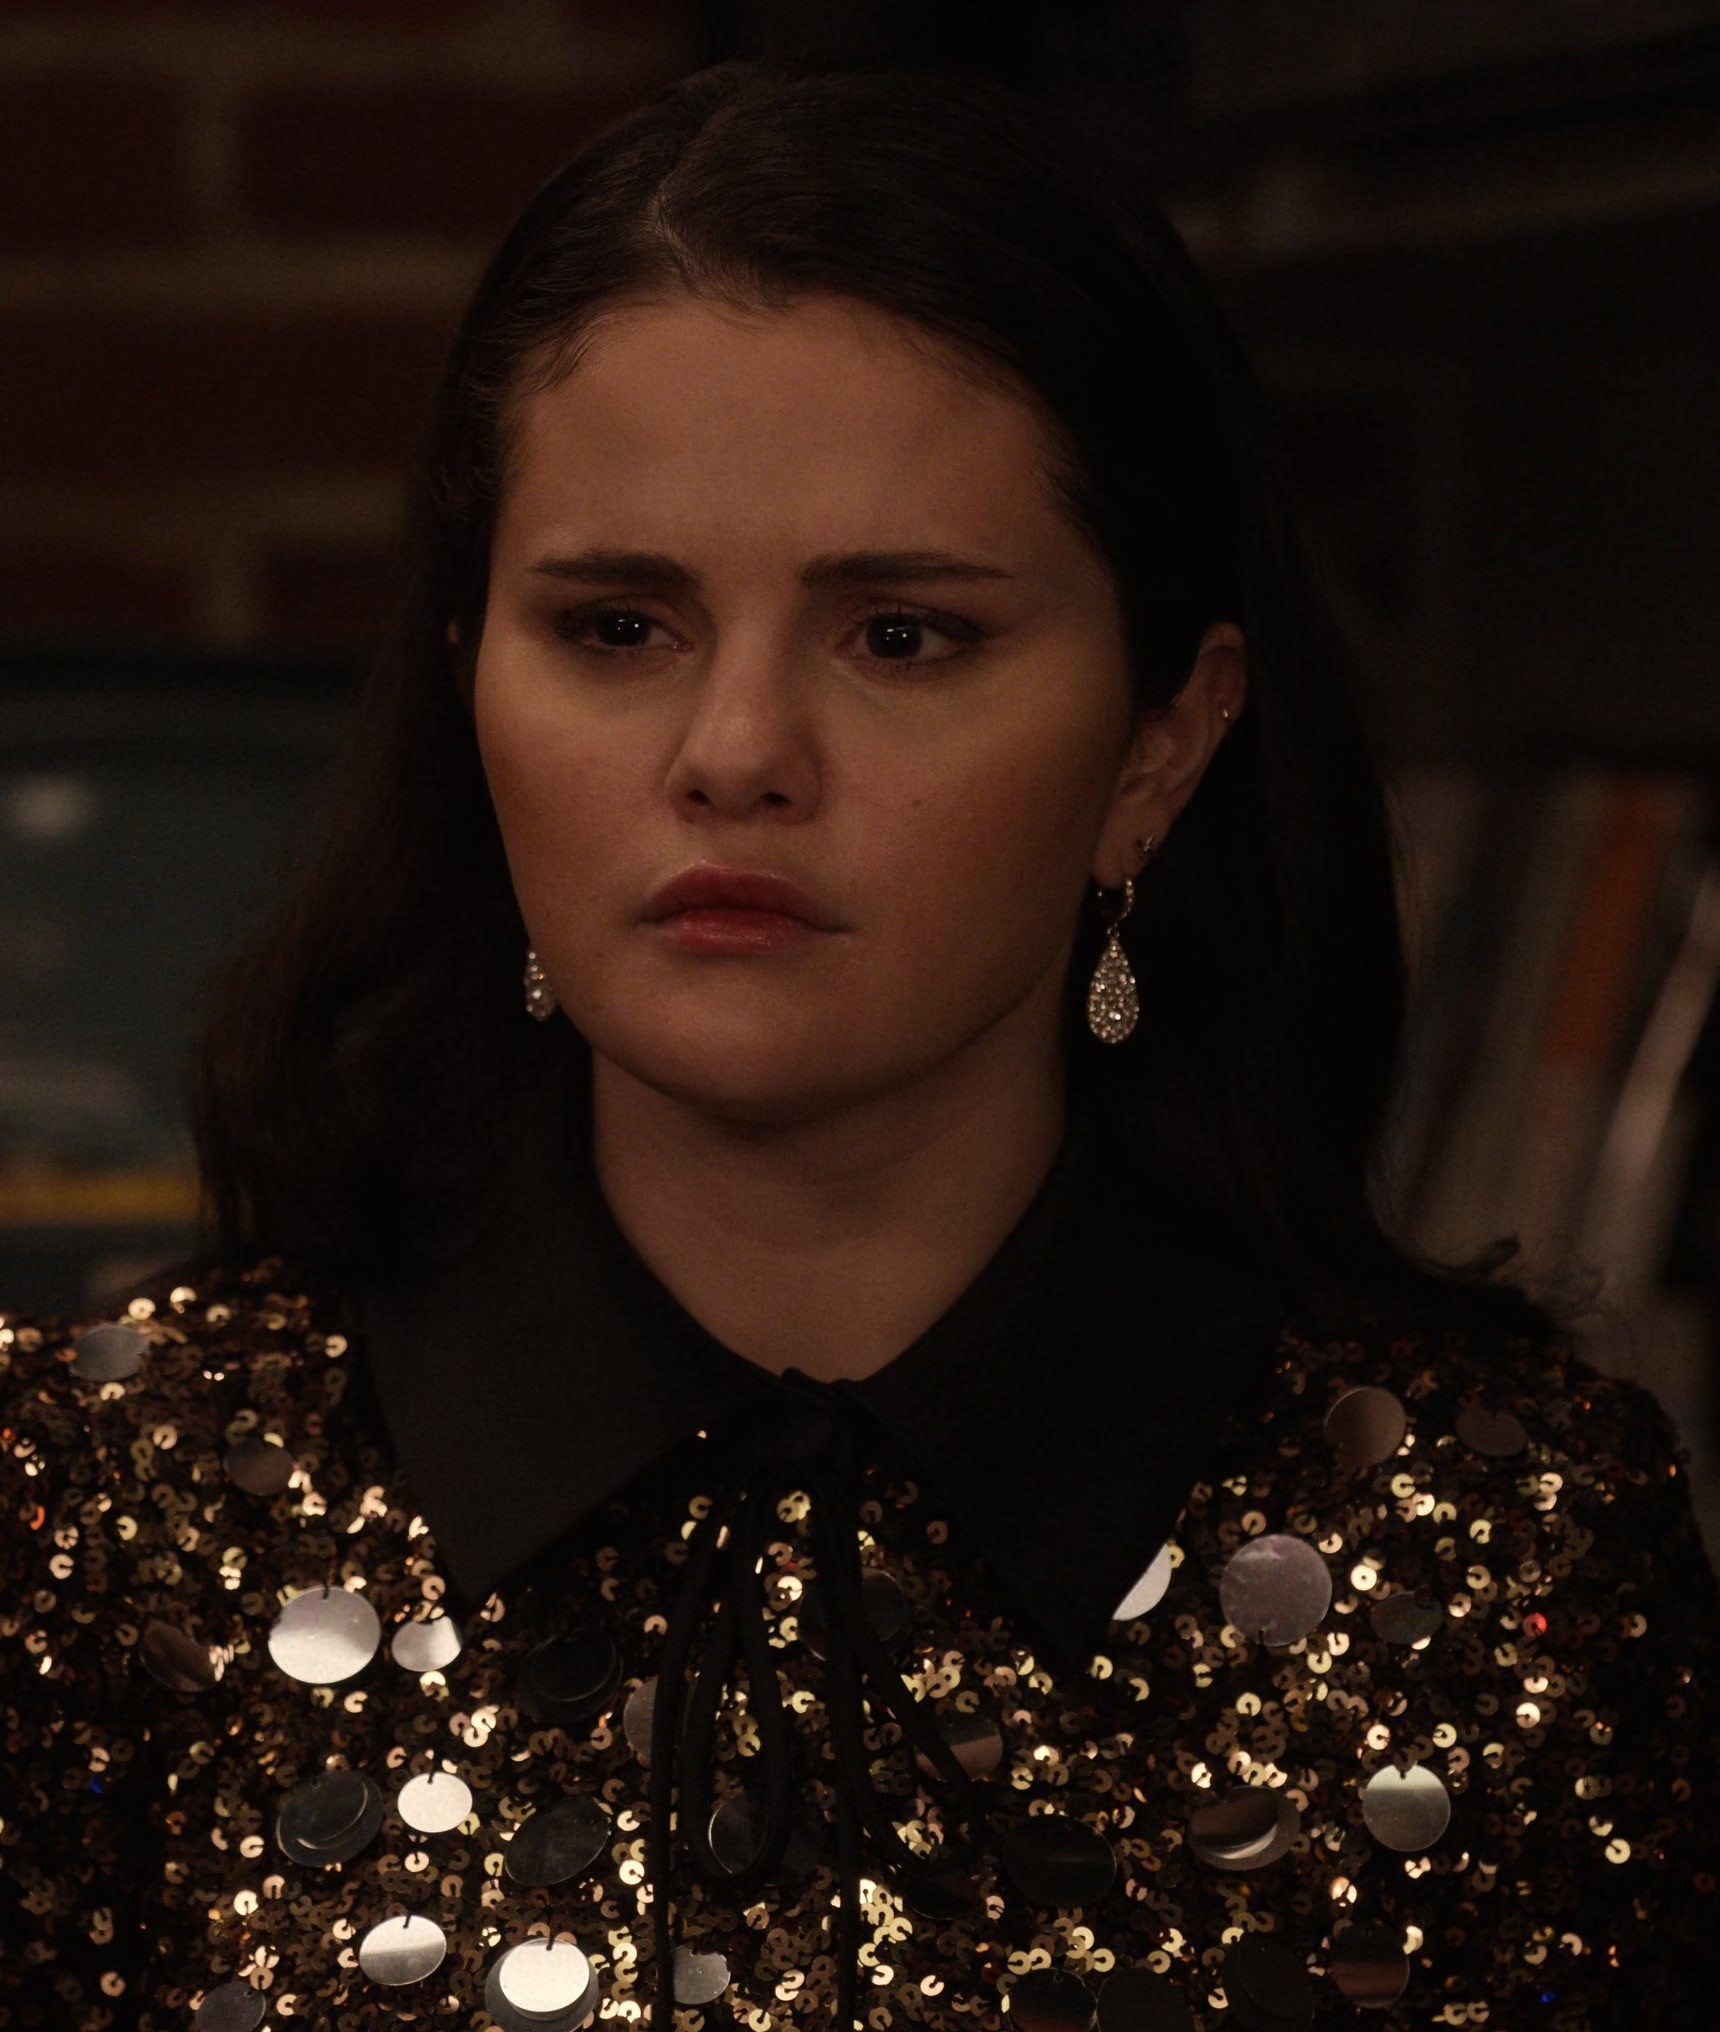 Worn on Only Murders in the Building TV Show - Diamond Embellished Drop Earrings of Selena Gomez as Mabel Mora